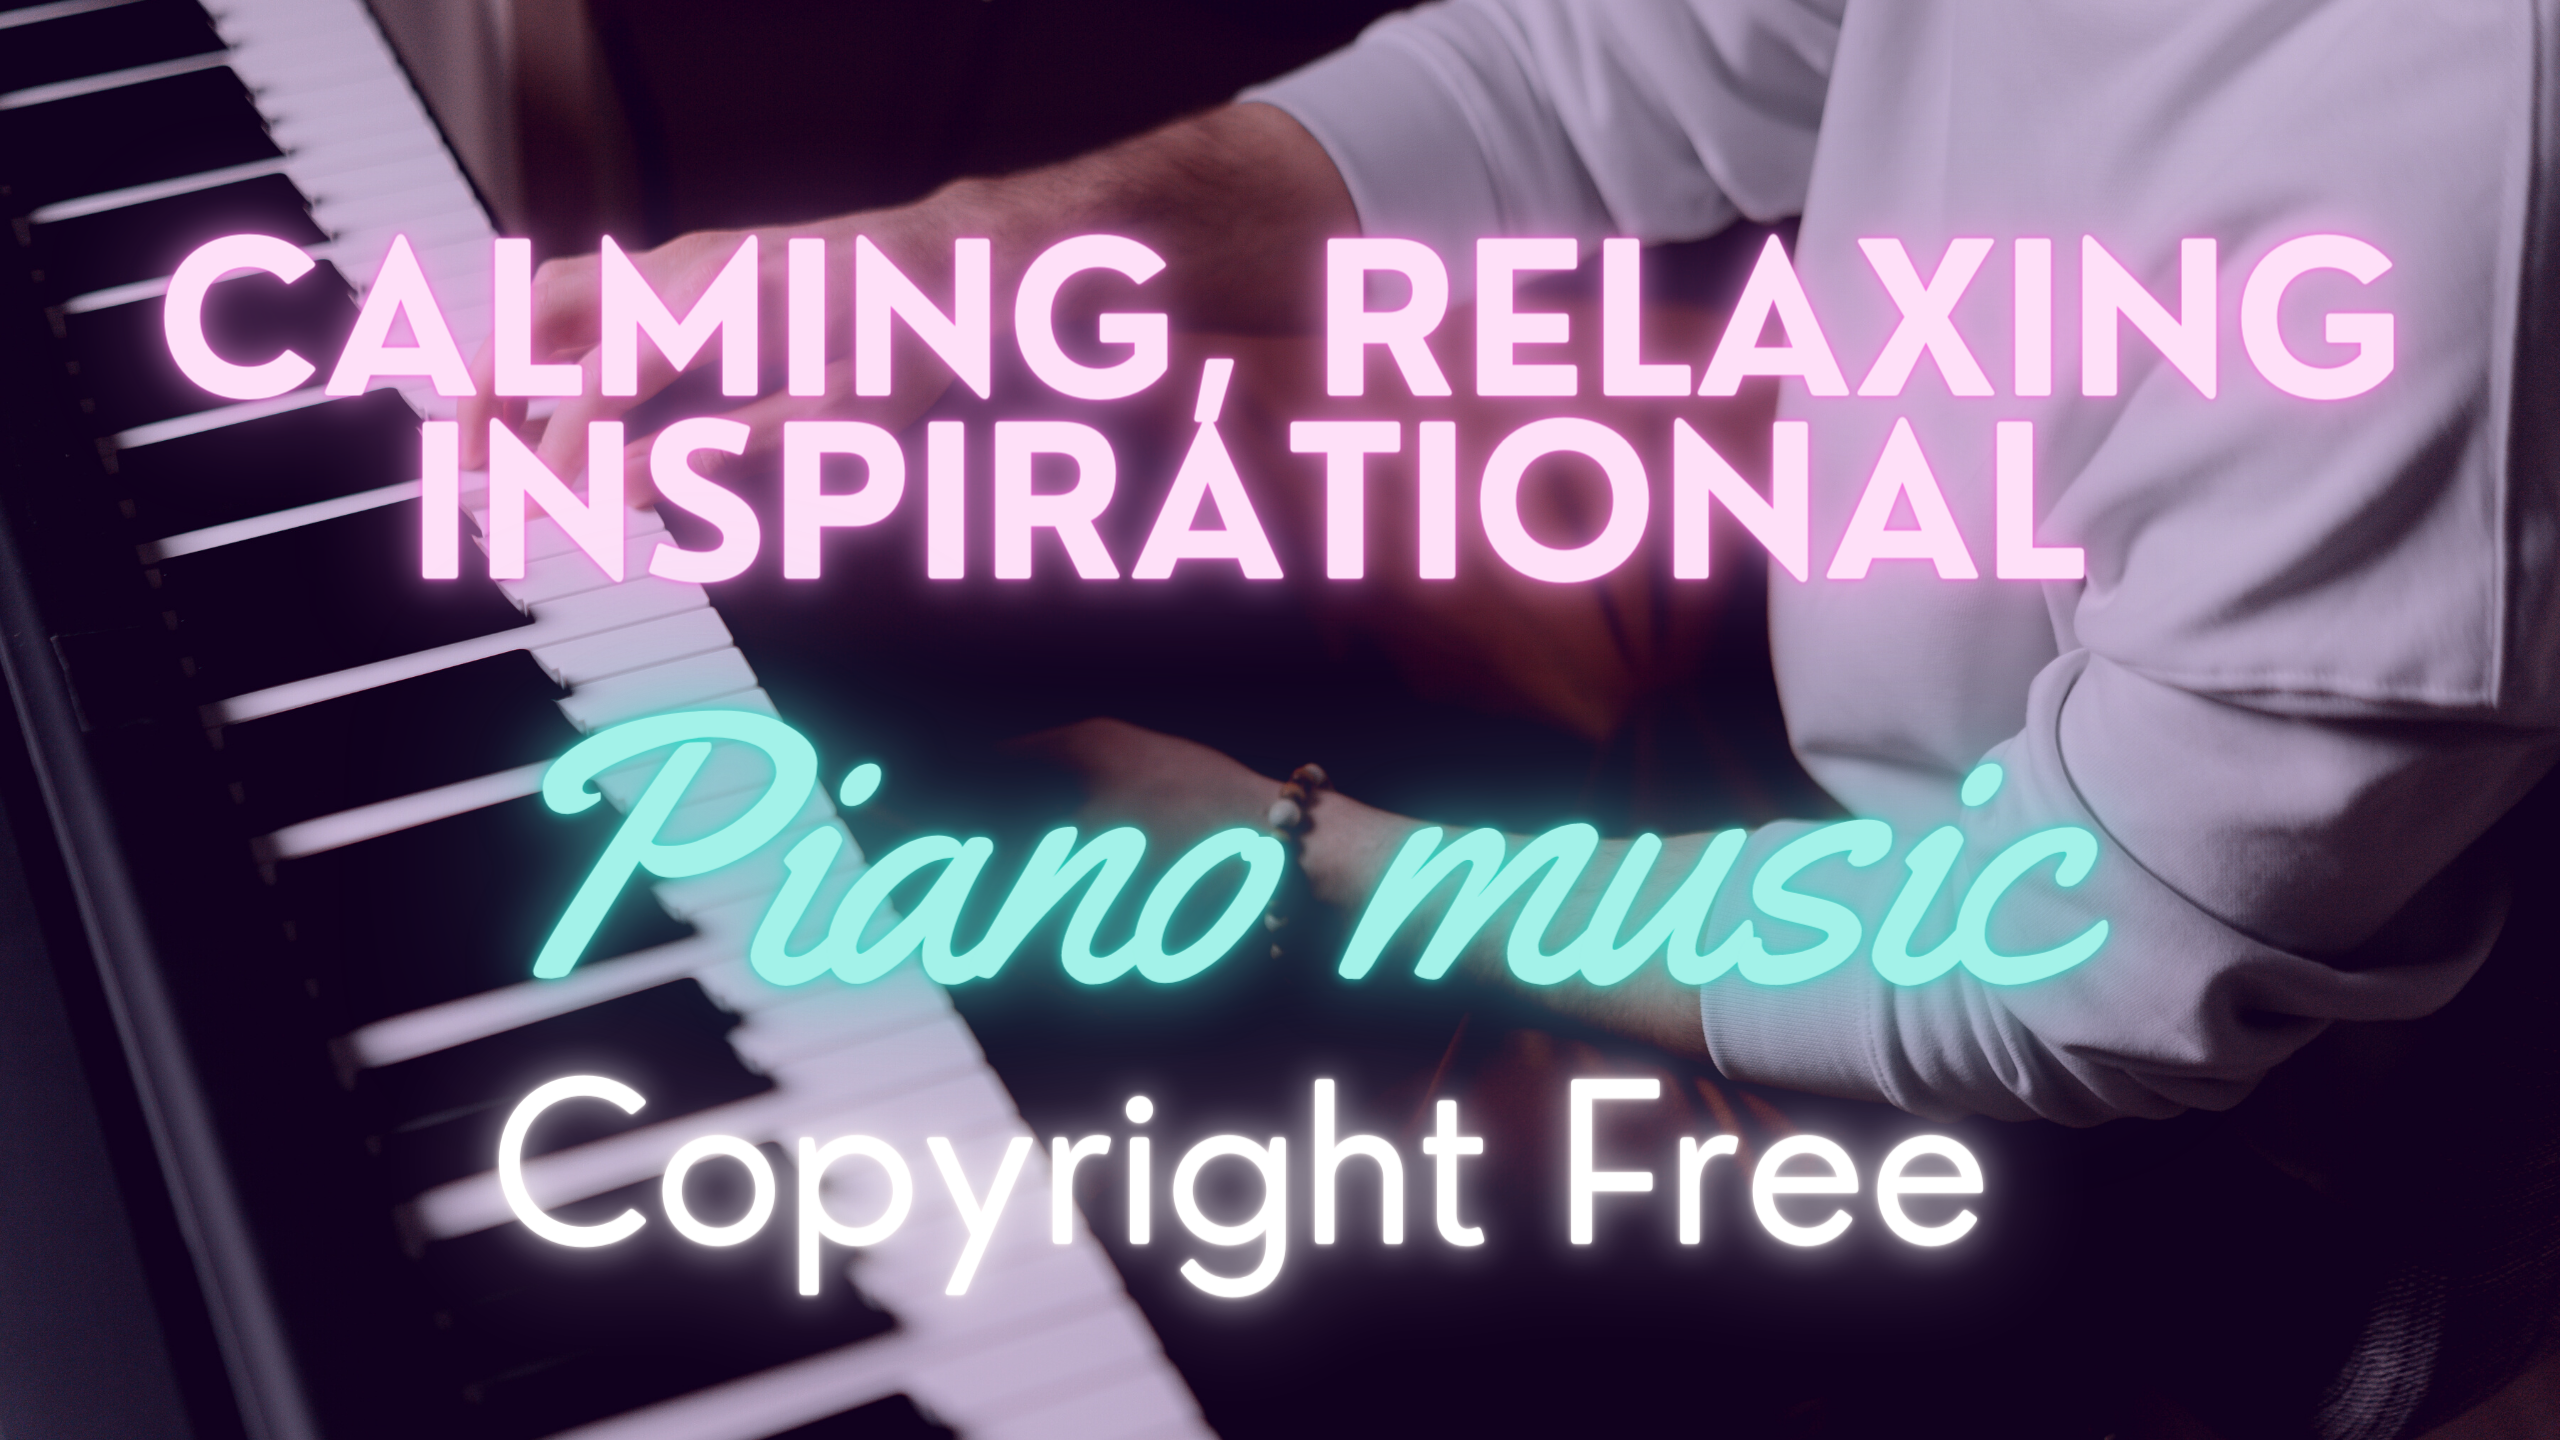 I Will Create Piano Music -Calming, Relaxing, Inspirational (Copyright Free)